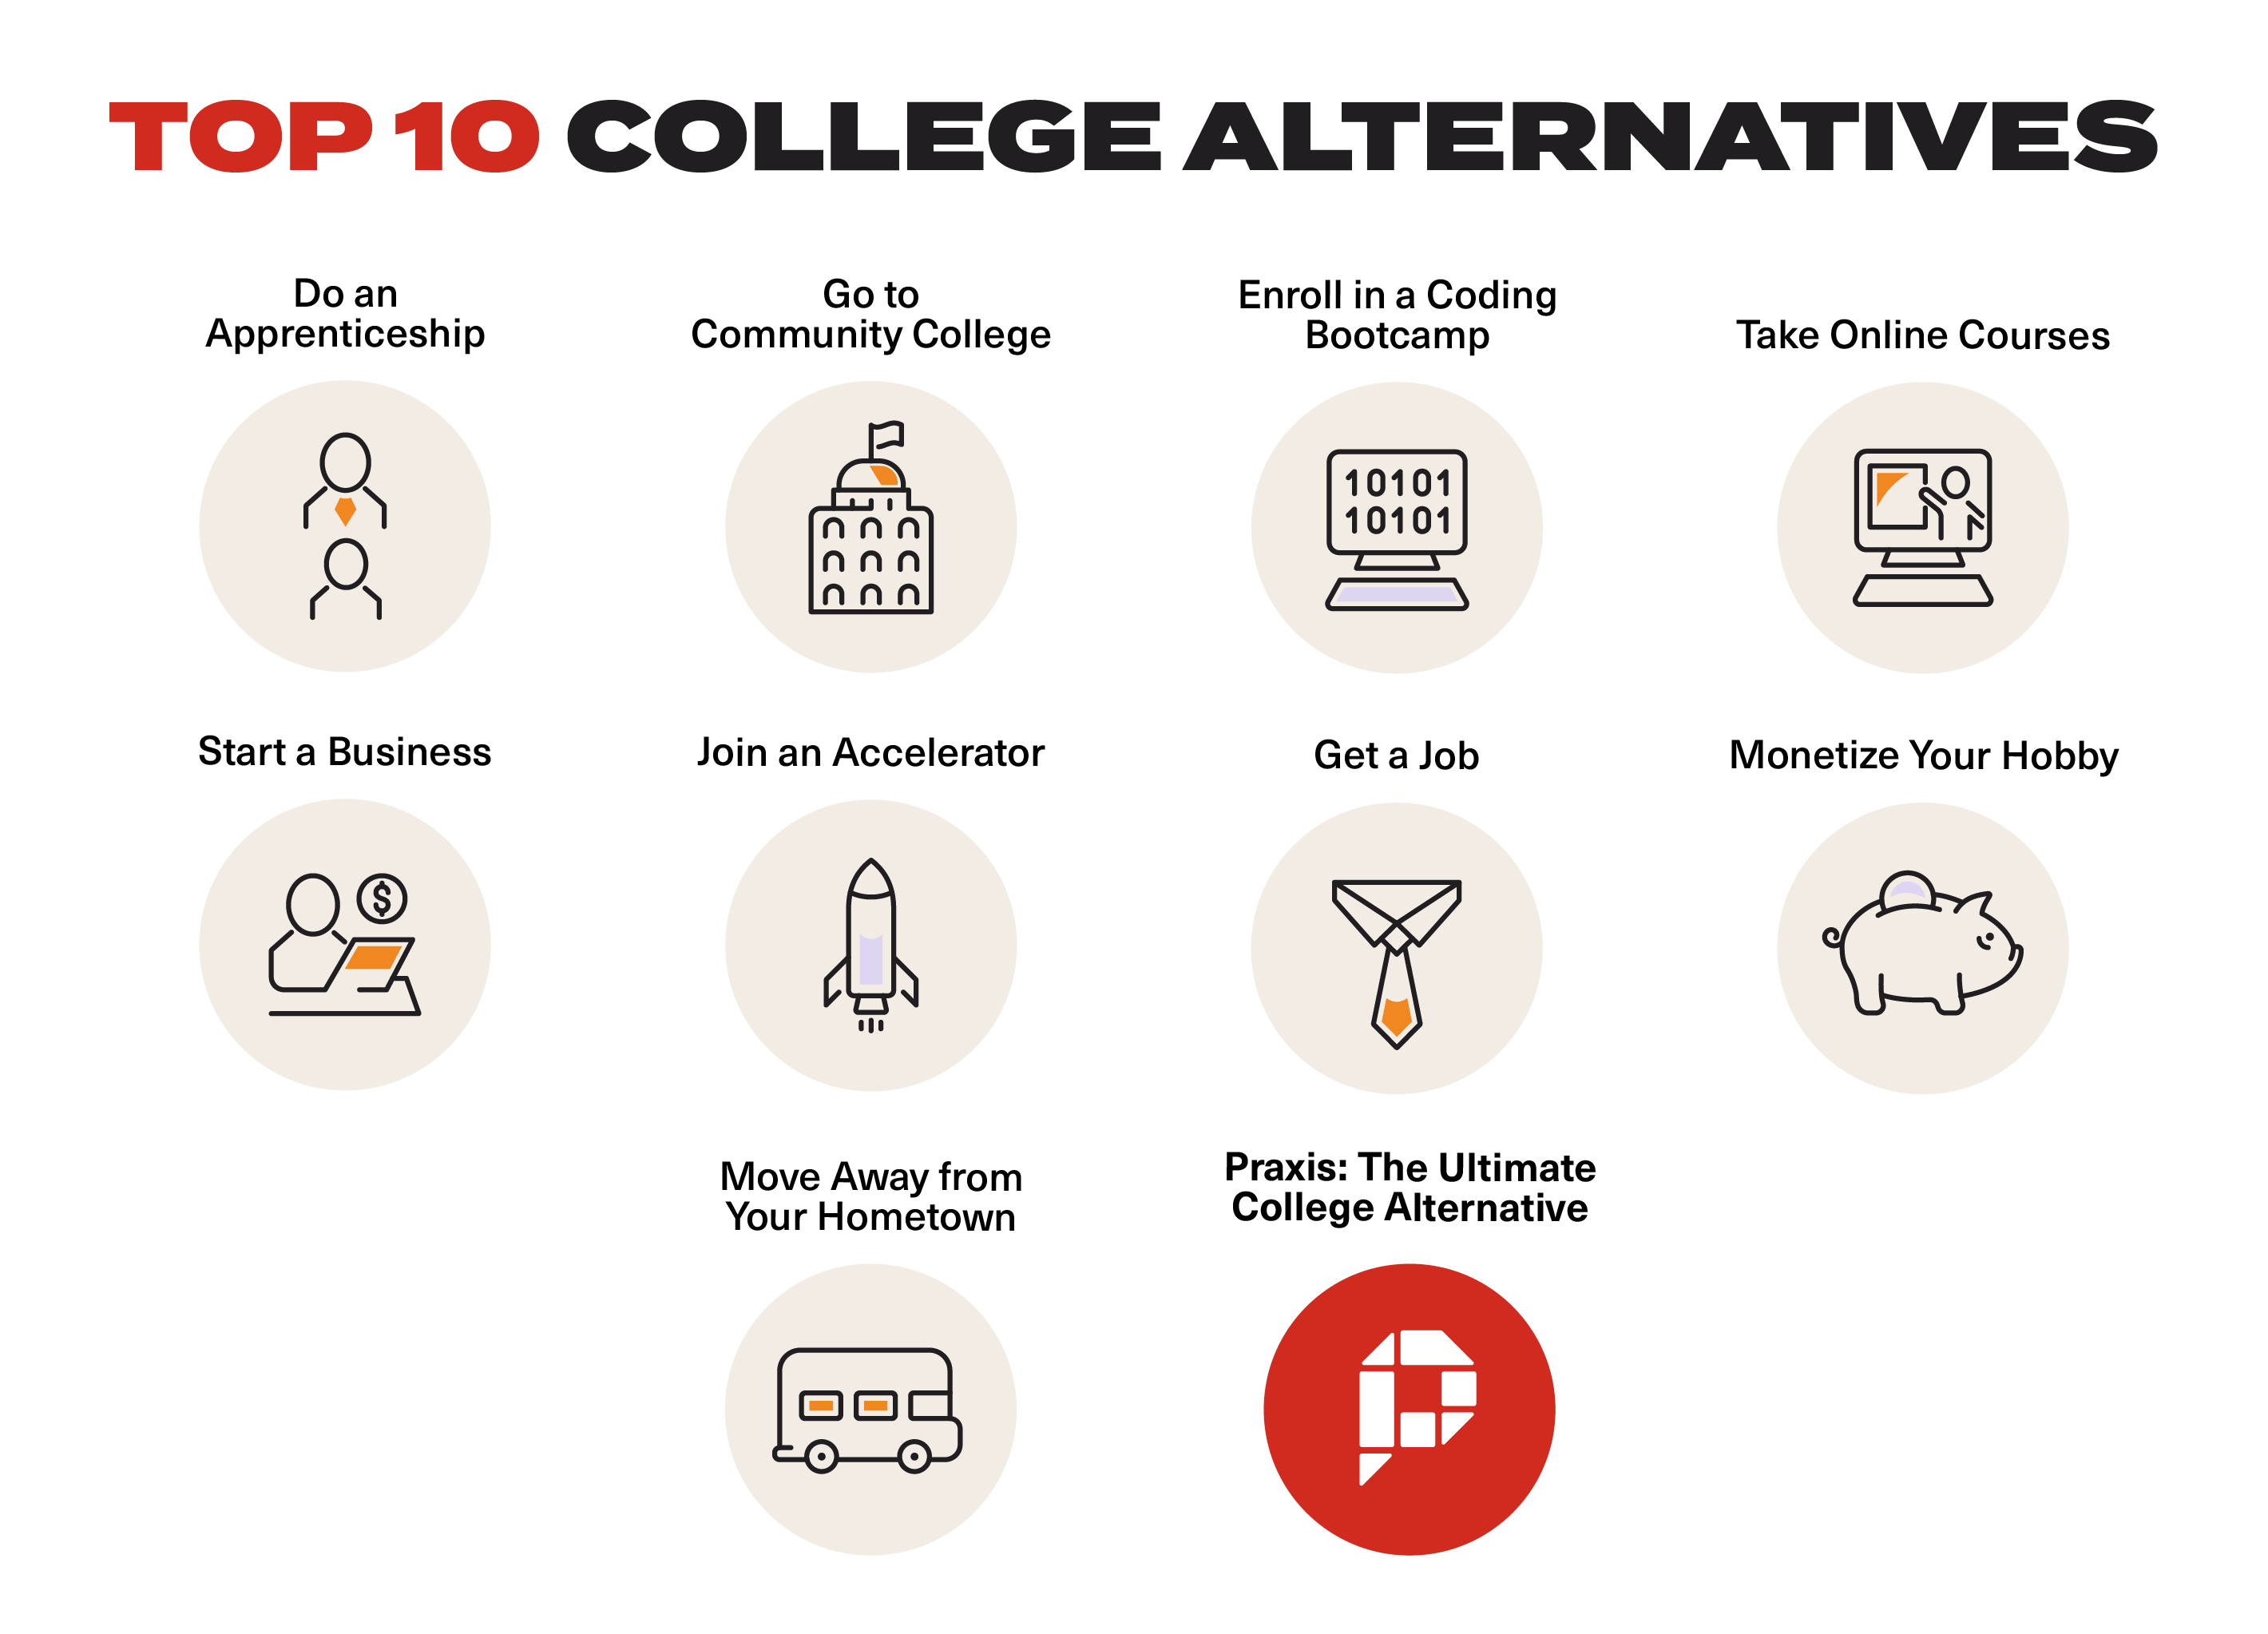 College Alternatives – What Are Your Options